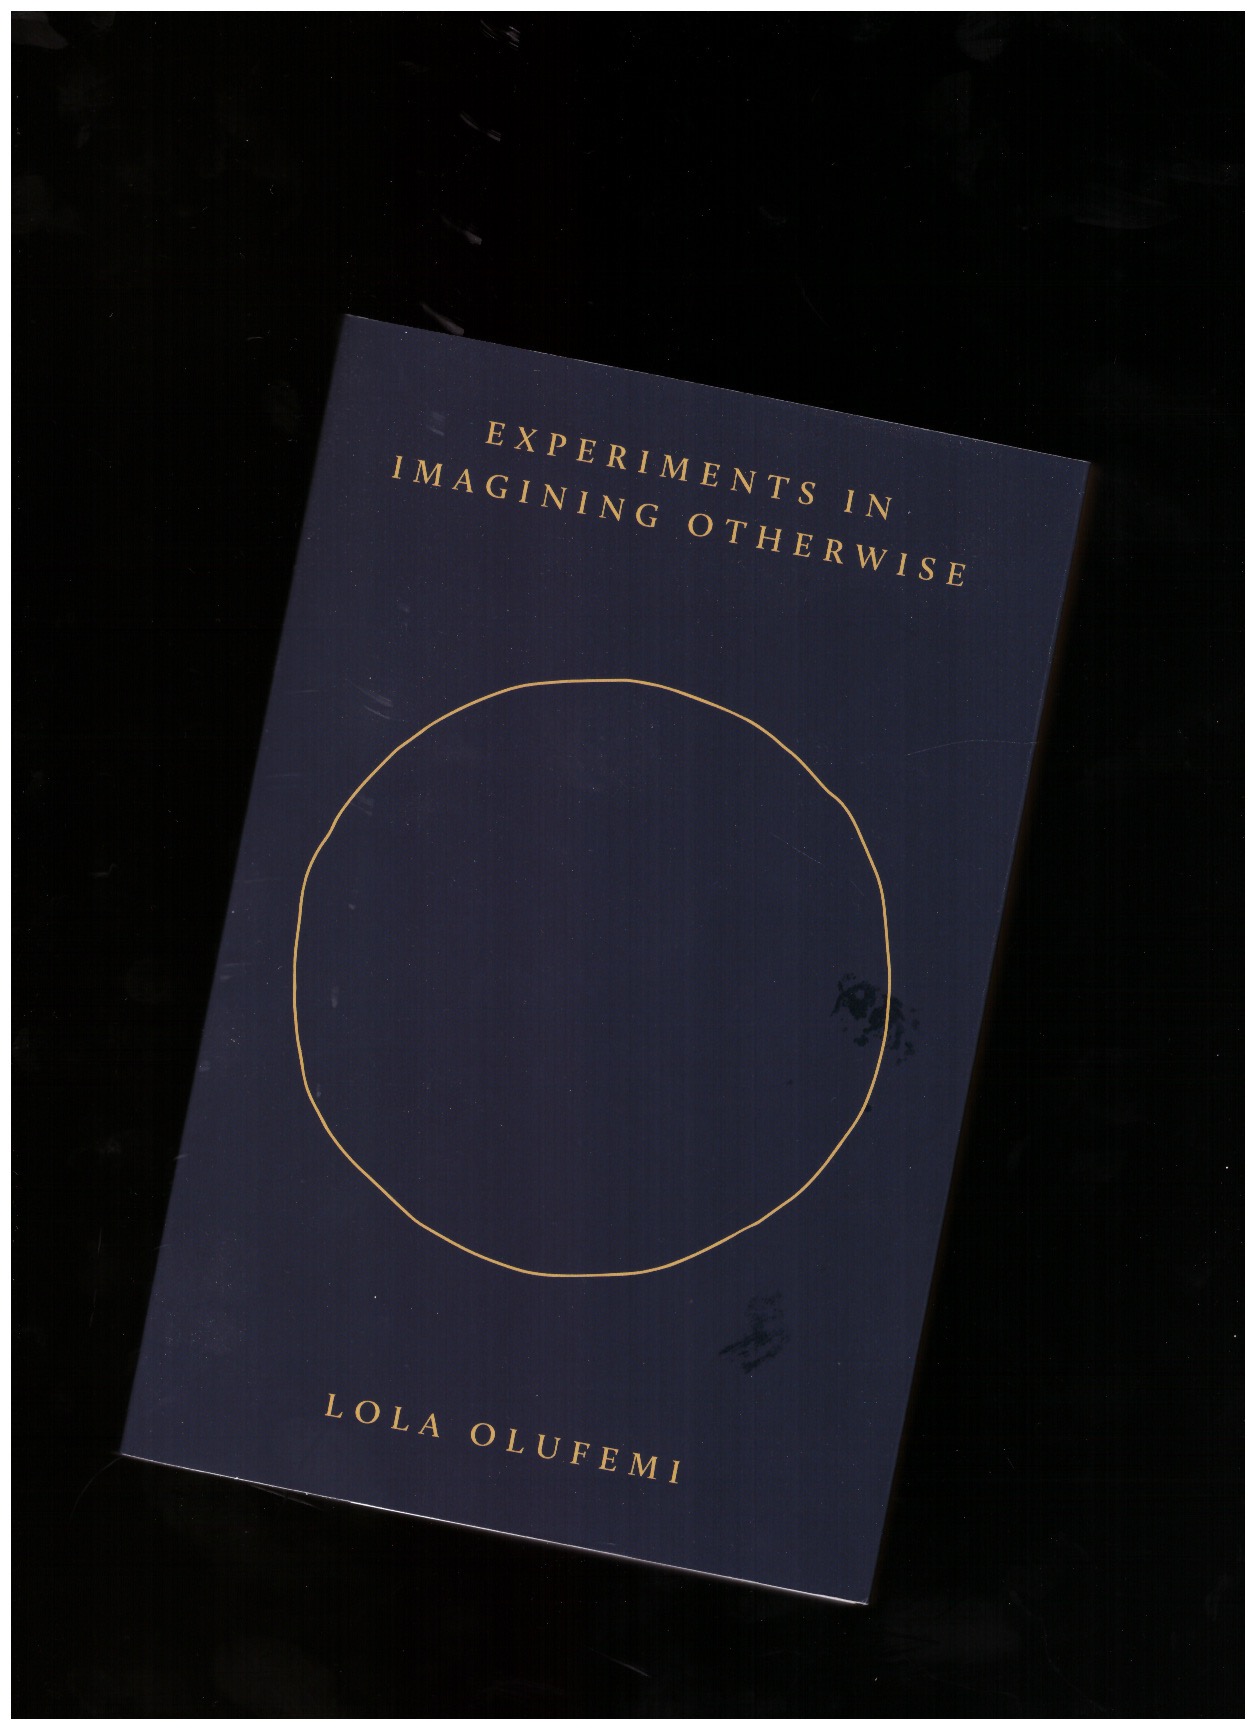 OLUFEMI, Lola - Experiments in Imagining Otherwise